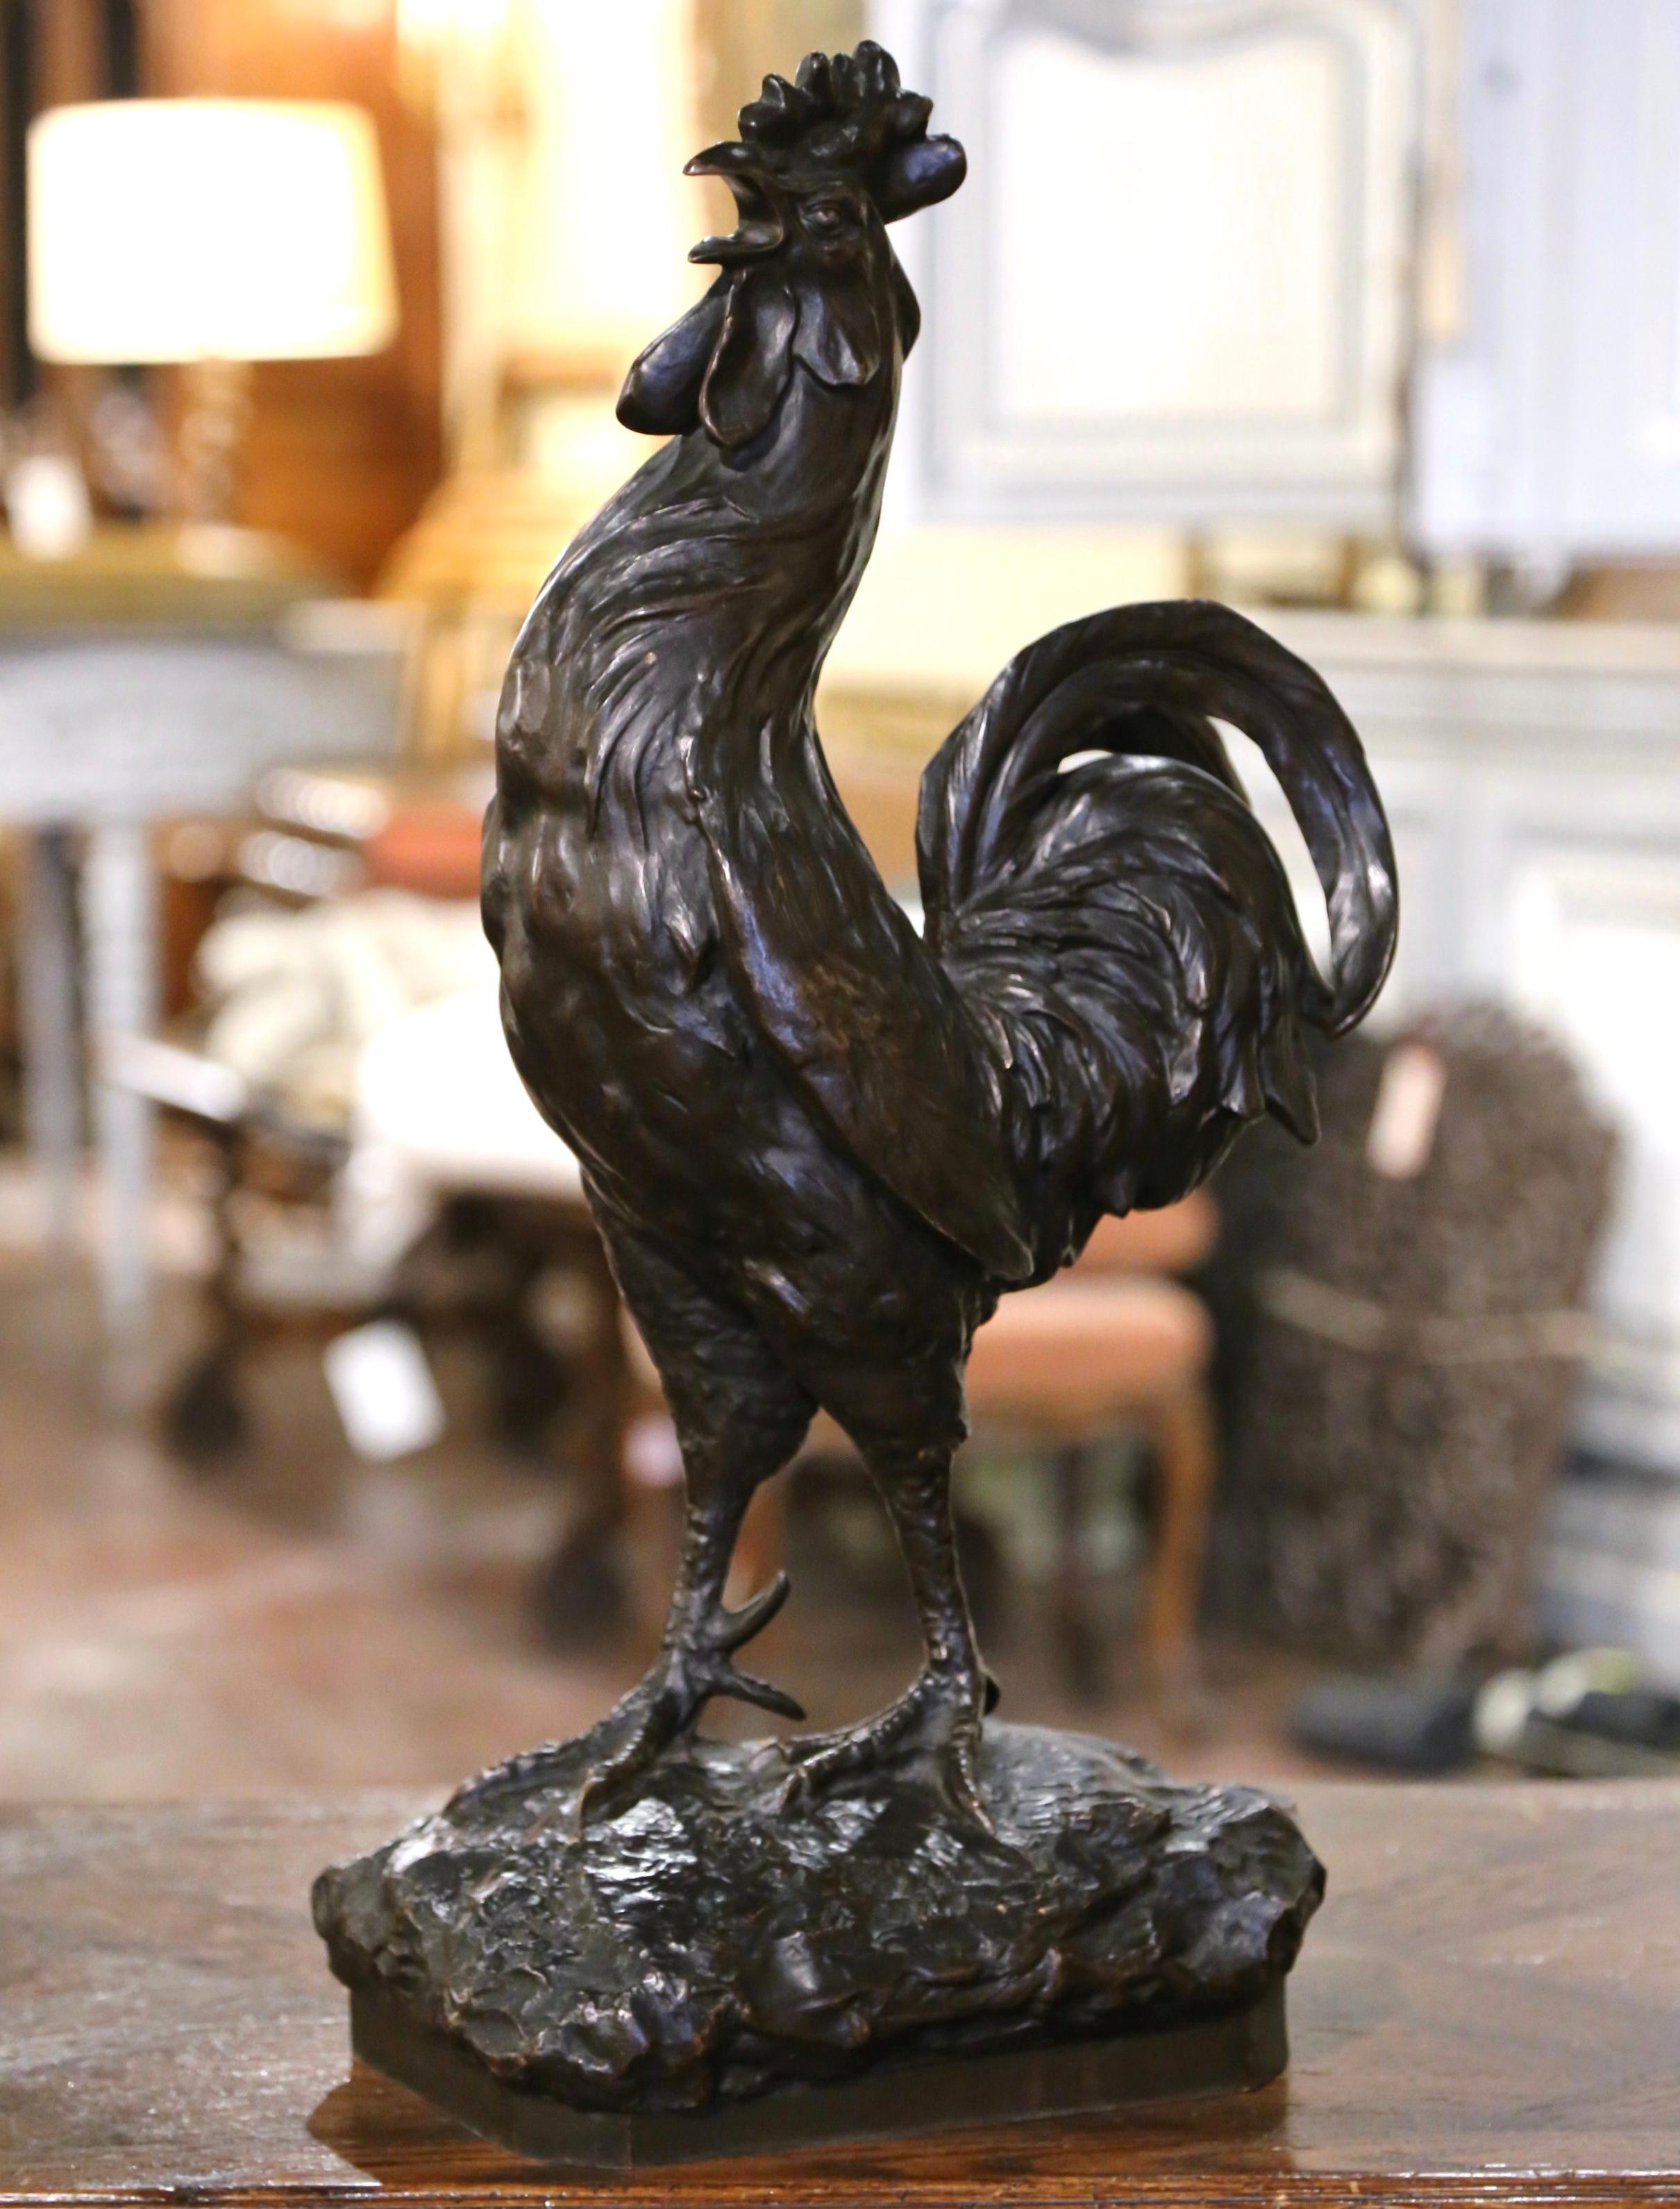 19th Century French Patinated Bronze Rooster Sculpture Signed J. Rabiant 1